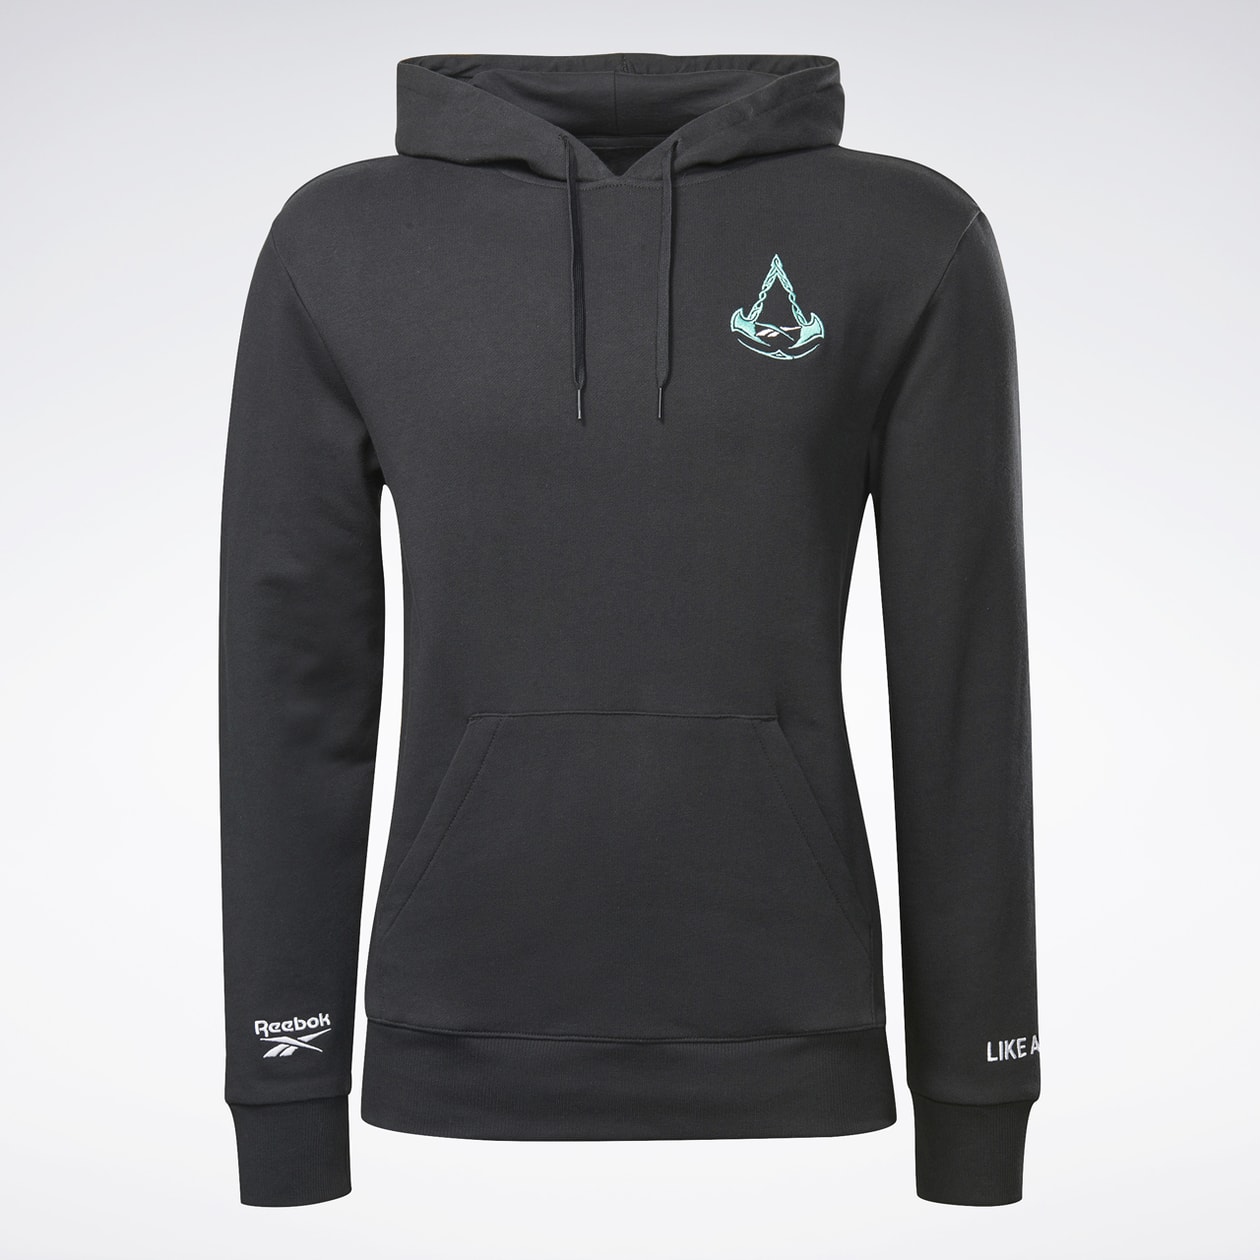 Ubisoft x Reebok 'Assassin's Creed Valhalla' Collaboration collection sneakers club c revenge Classic Leather Legacy zig kinetica release date info buy united states europe november 7 11 game franchise apparel clothing